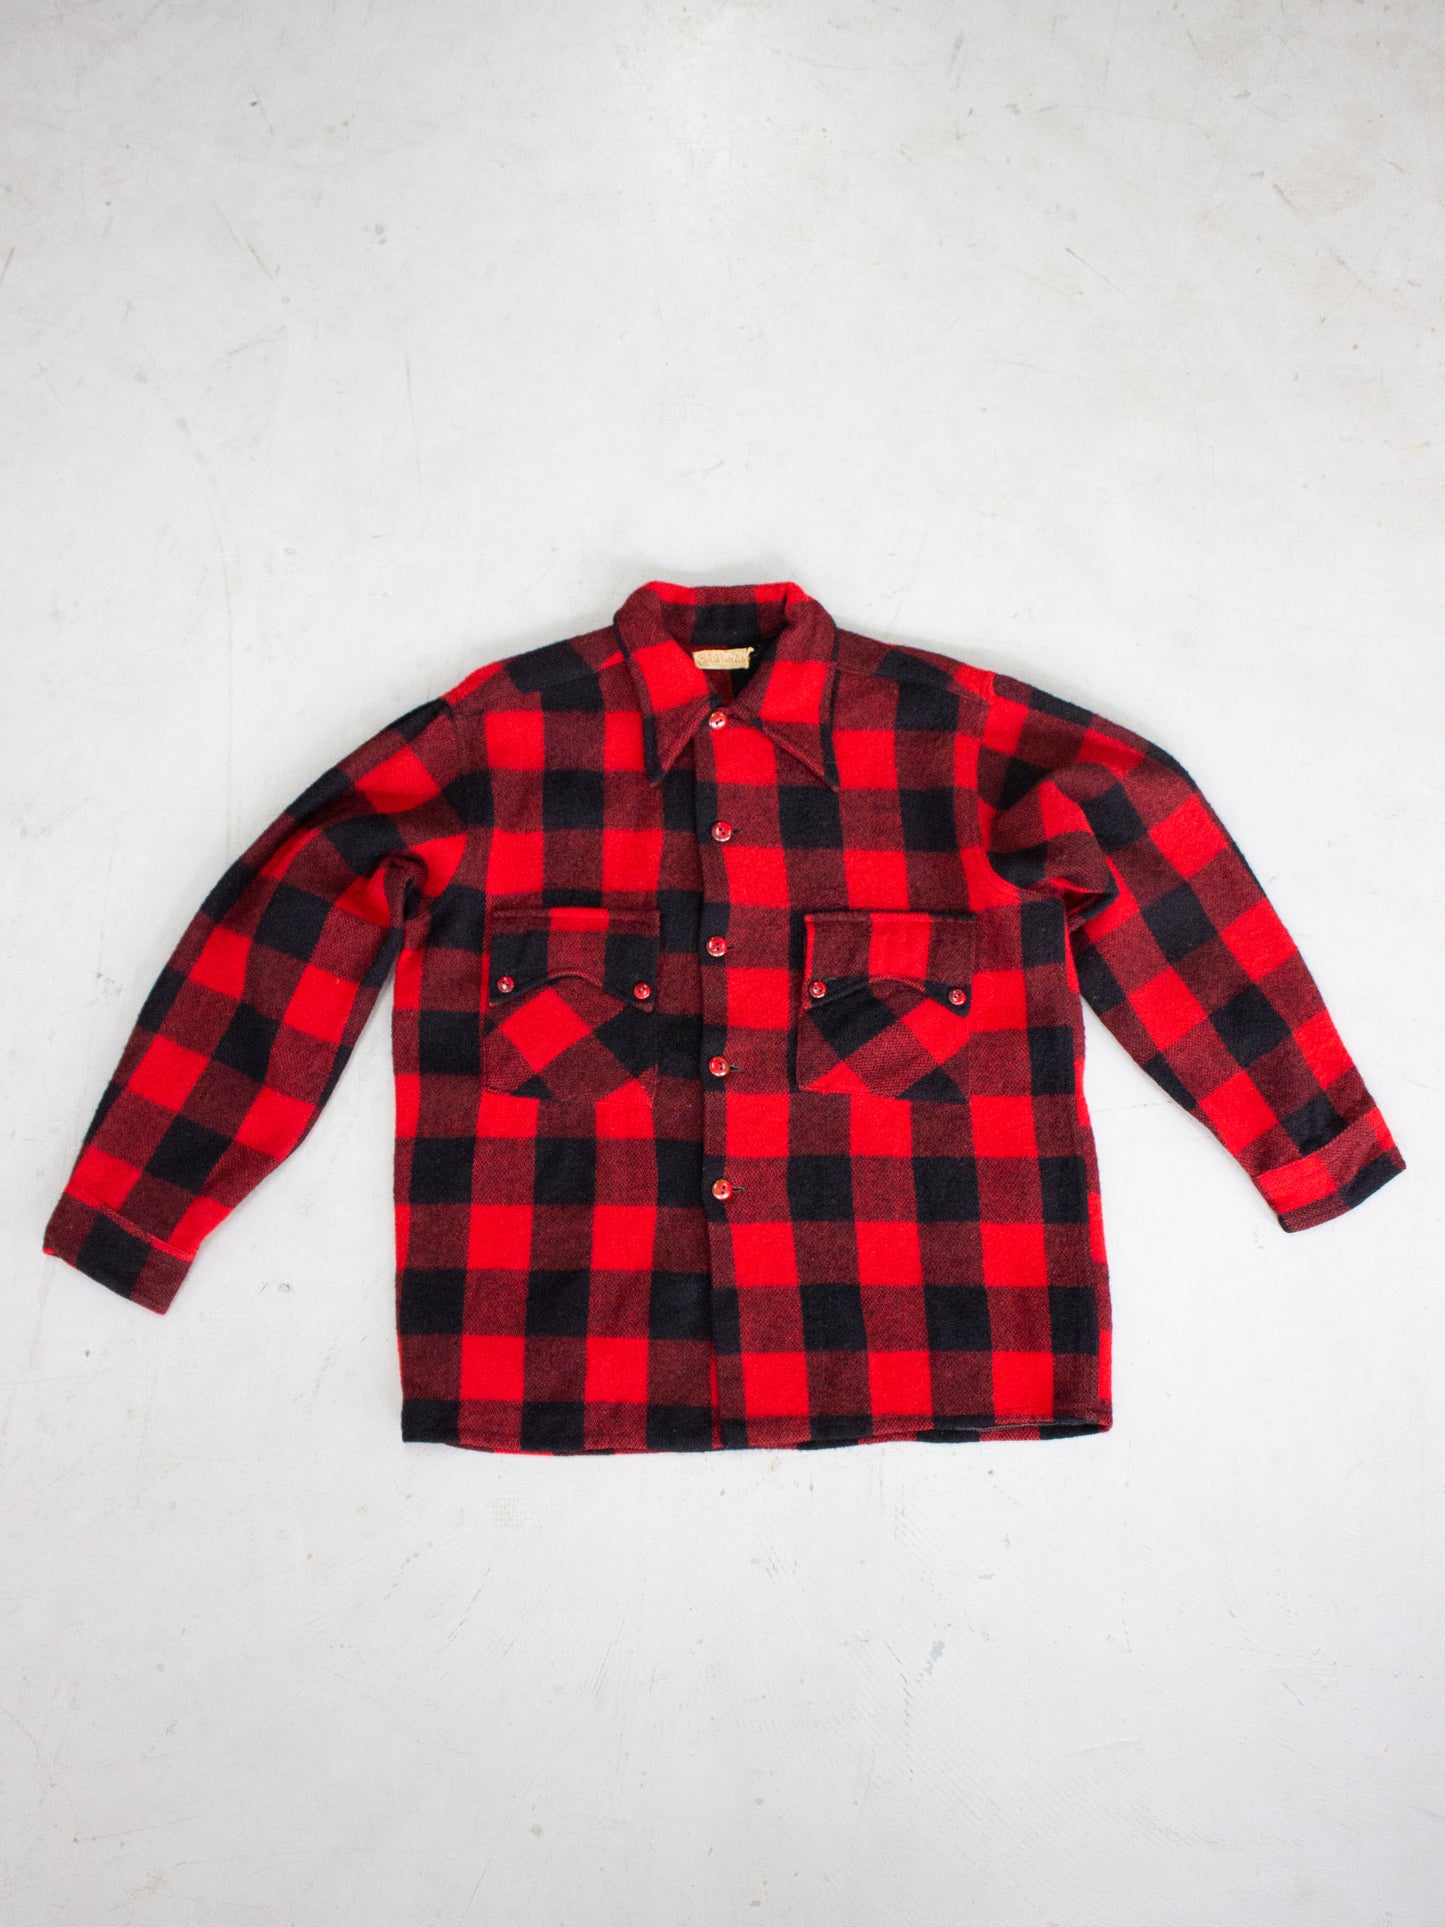 1950's-1960's Clifford Red Buffalo Plaid Wool Flannel (Medium-Large)